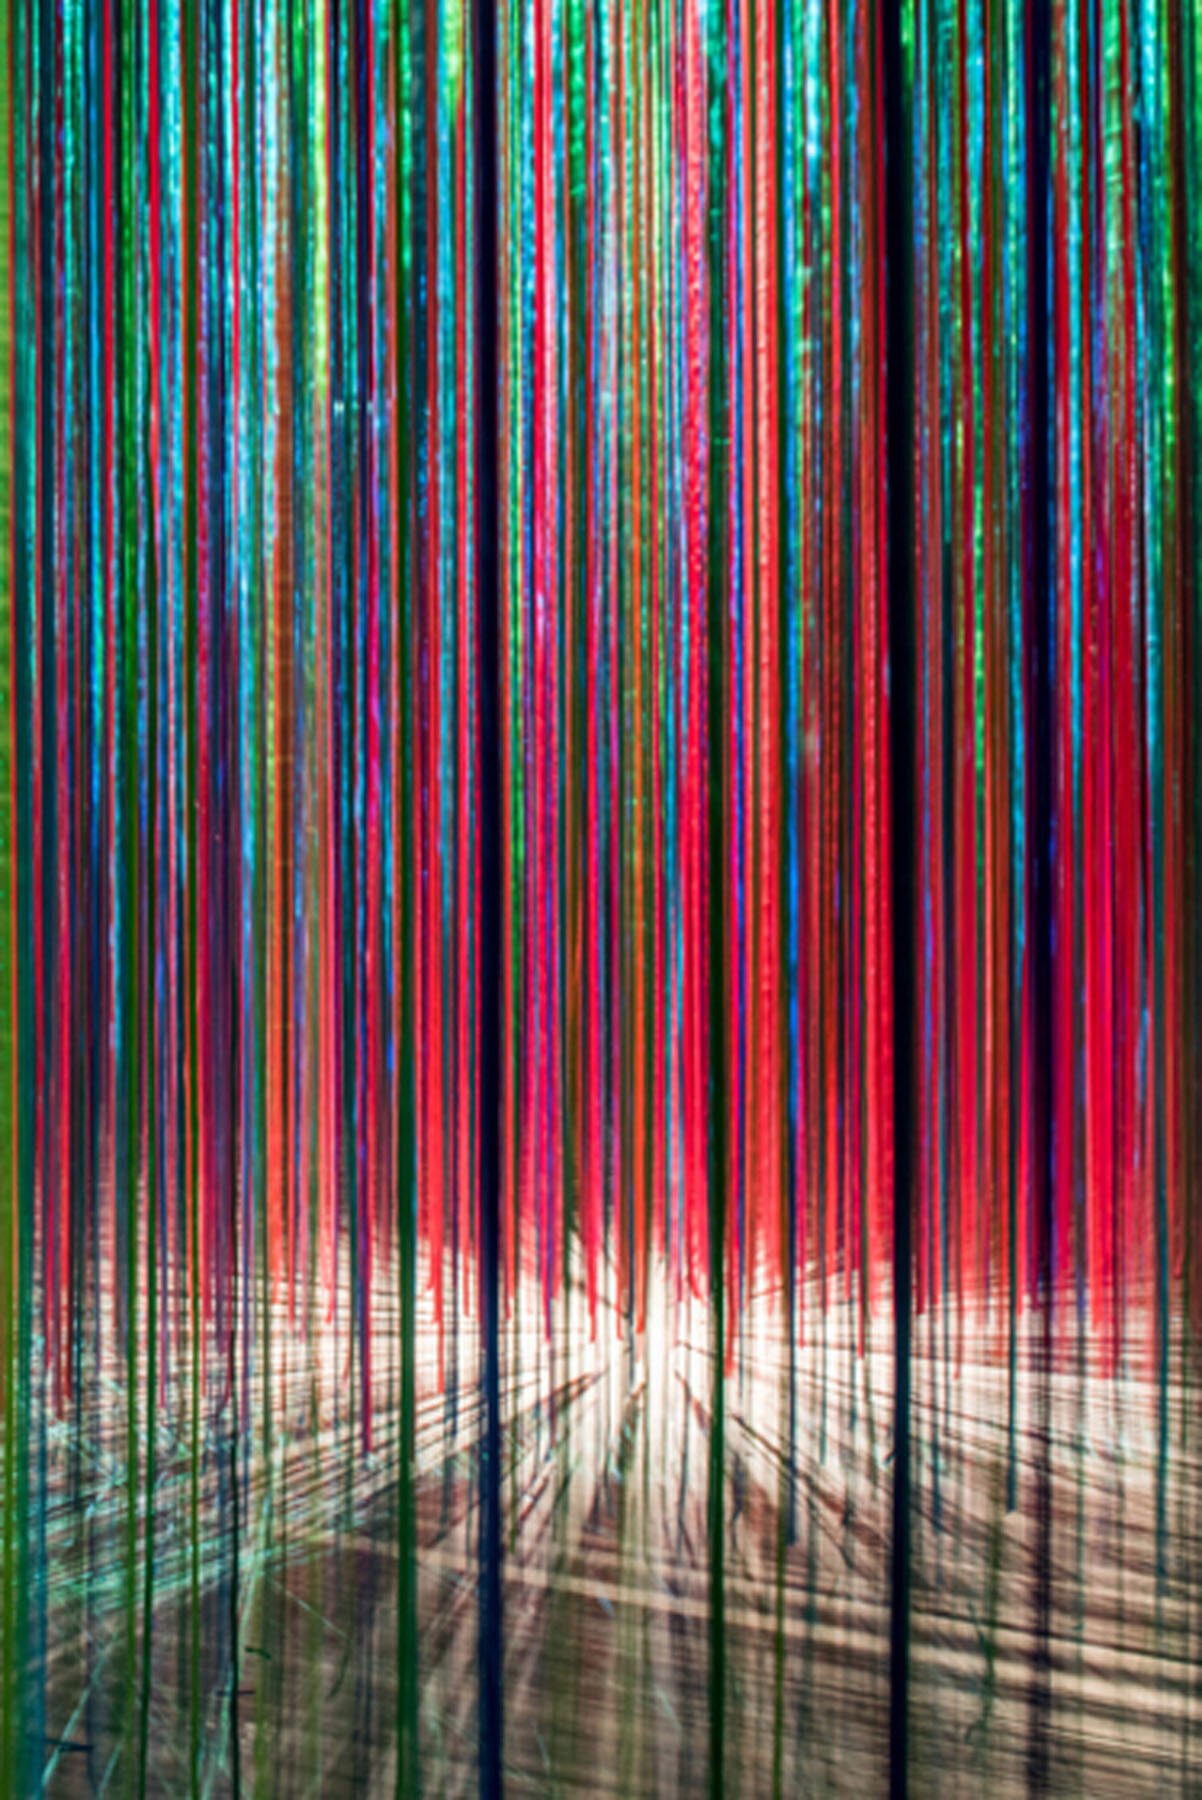 Anne patterson_pathless woods_ringling museum_state museum of florida_ribbon art_fabric art_textile art_installation artist_synesthetic_6.jpg